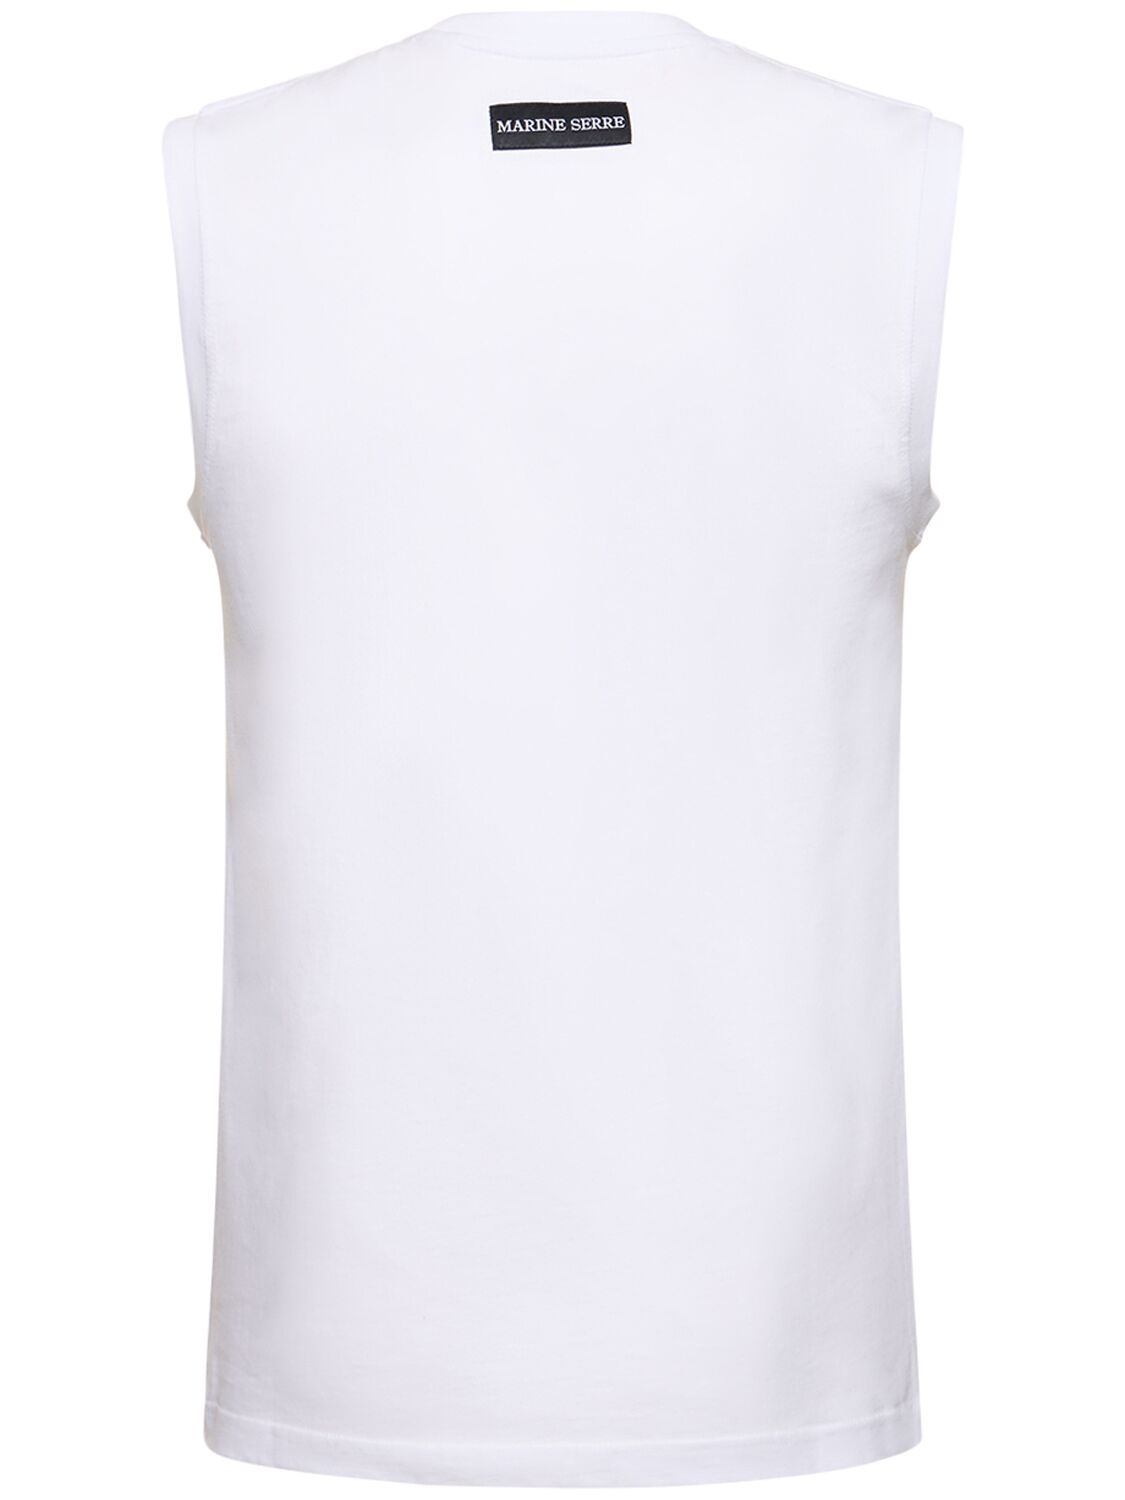 LOGO EMBROIDERED TANK TOP in white